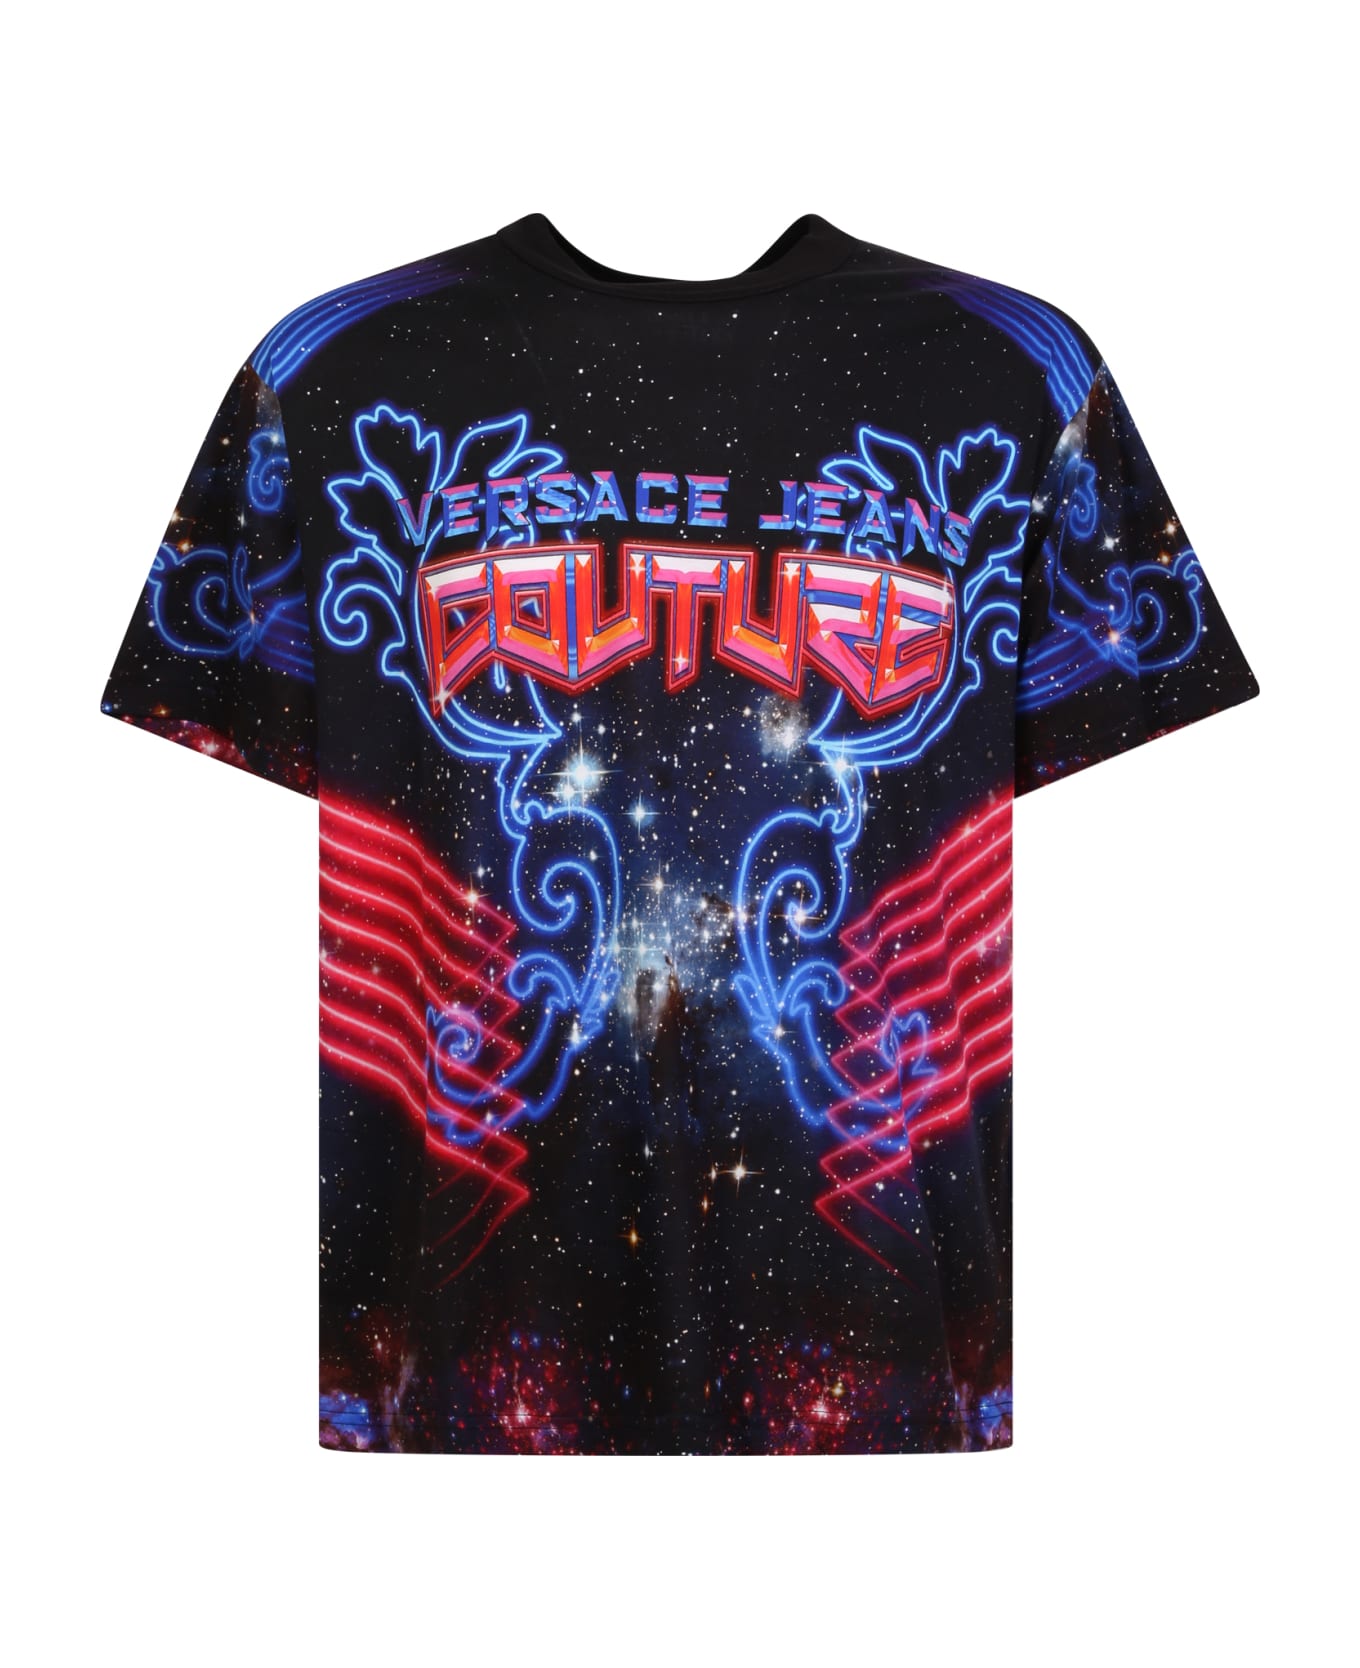 Versace Jeans Couture T-shirt With Galaxy Print Black - Blue